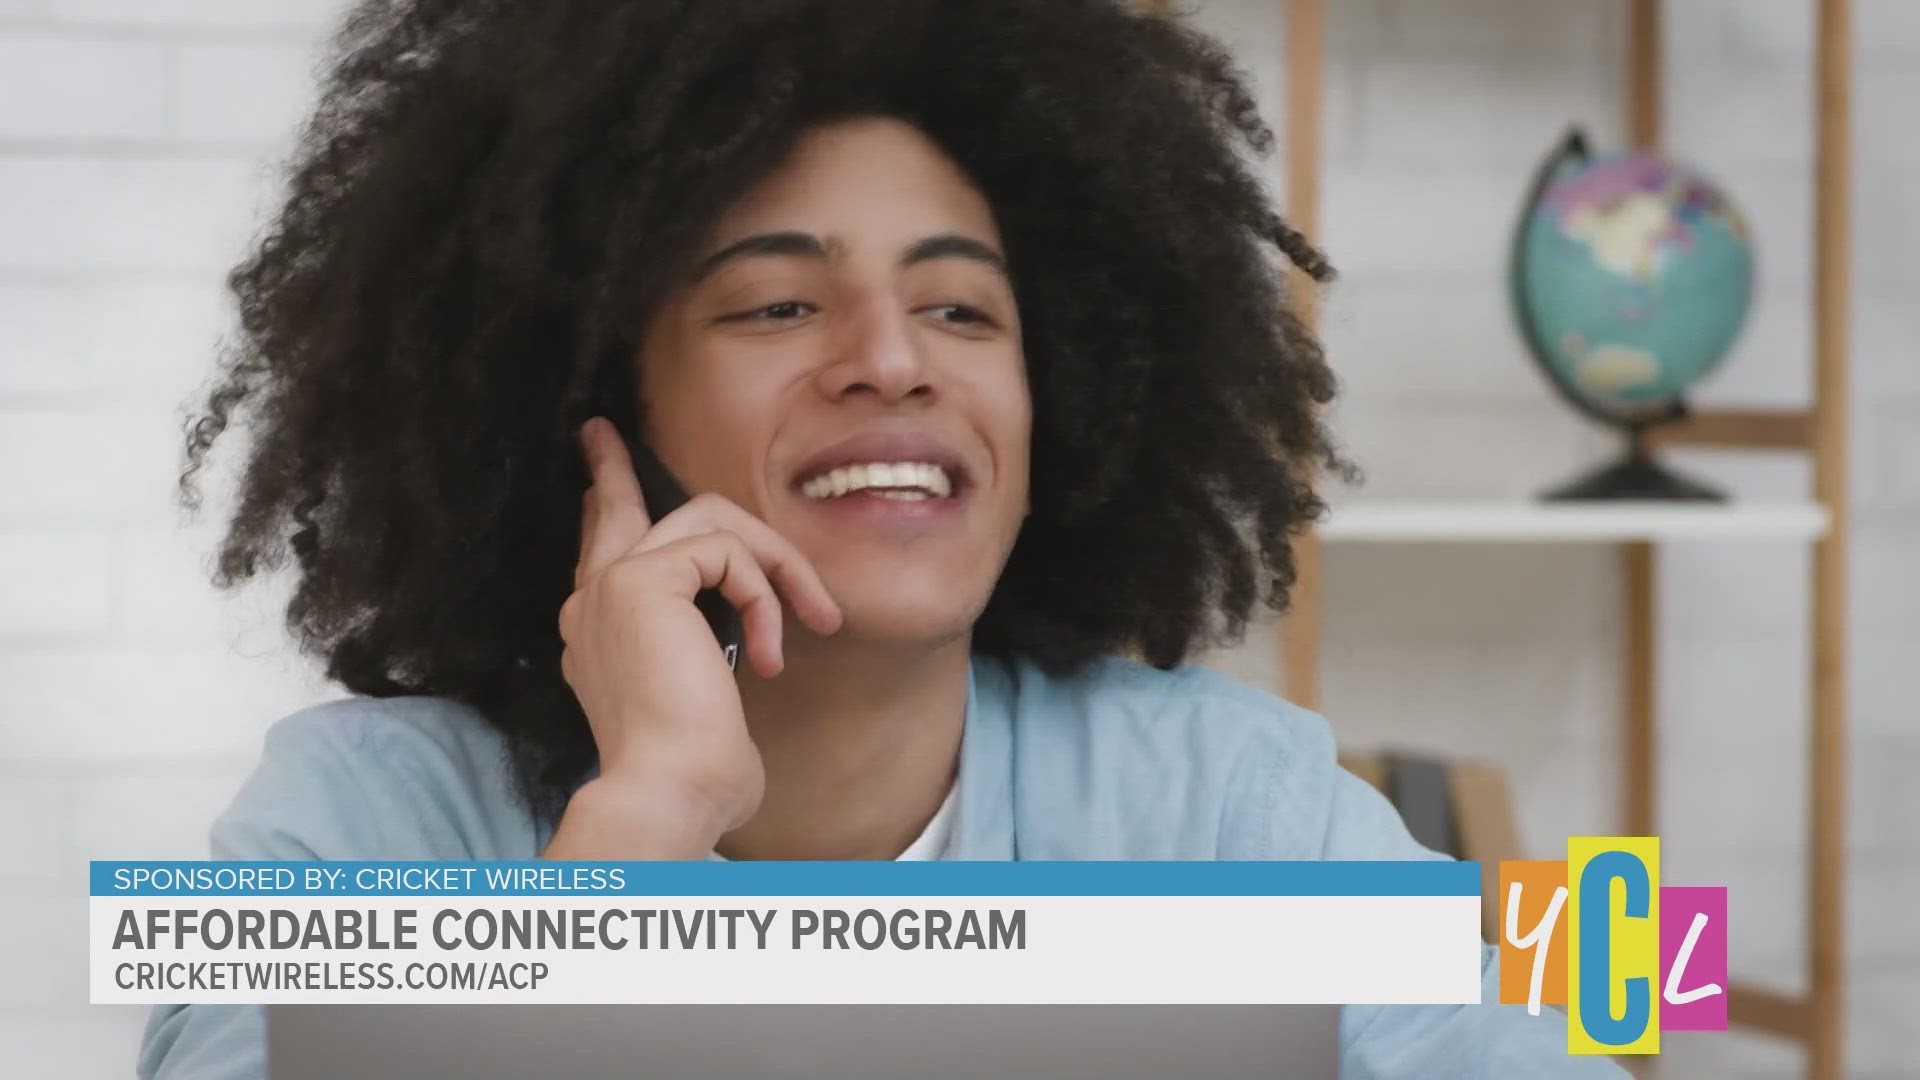 Connectivity has proven to be an essential service for all, but many households have struggled to keep up with payments. This segment is paid by Cricket Wireless.